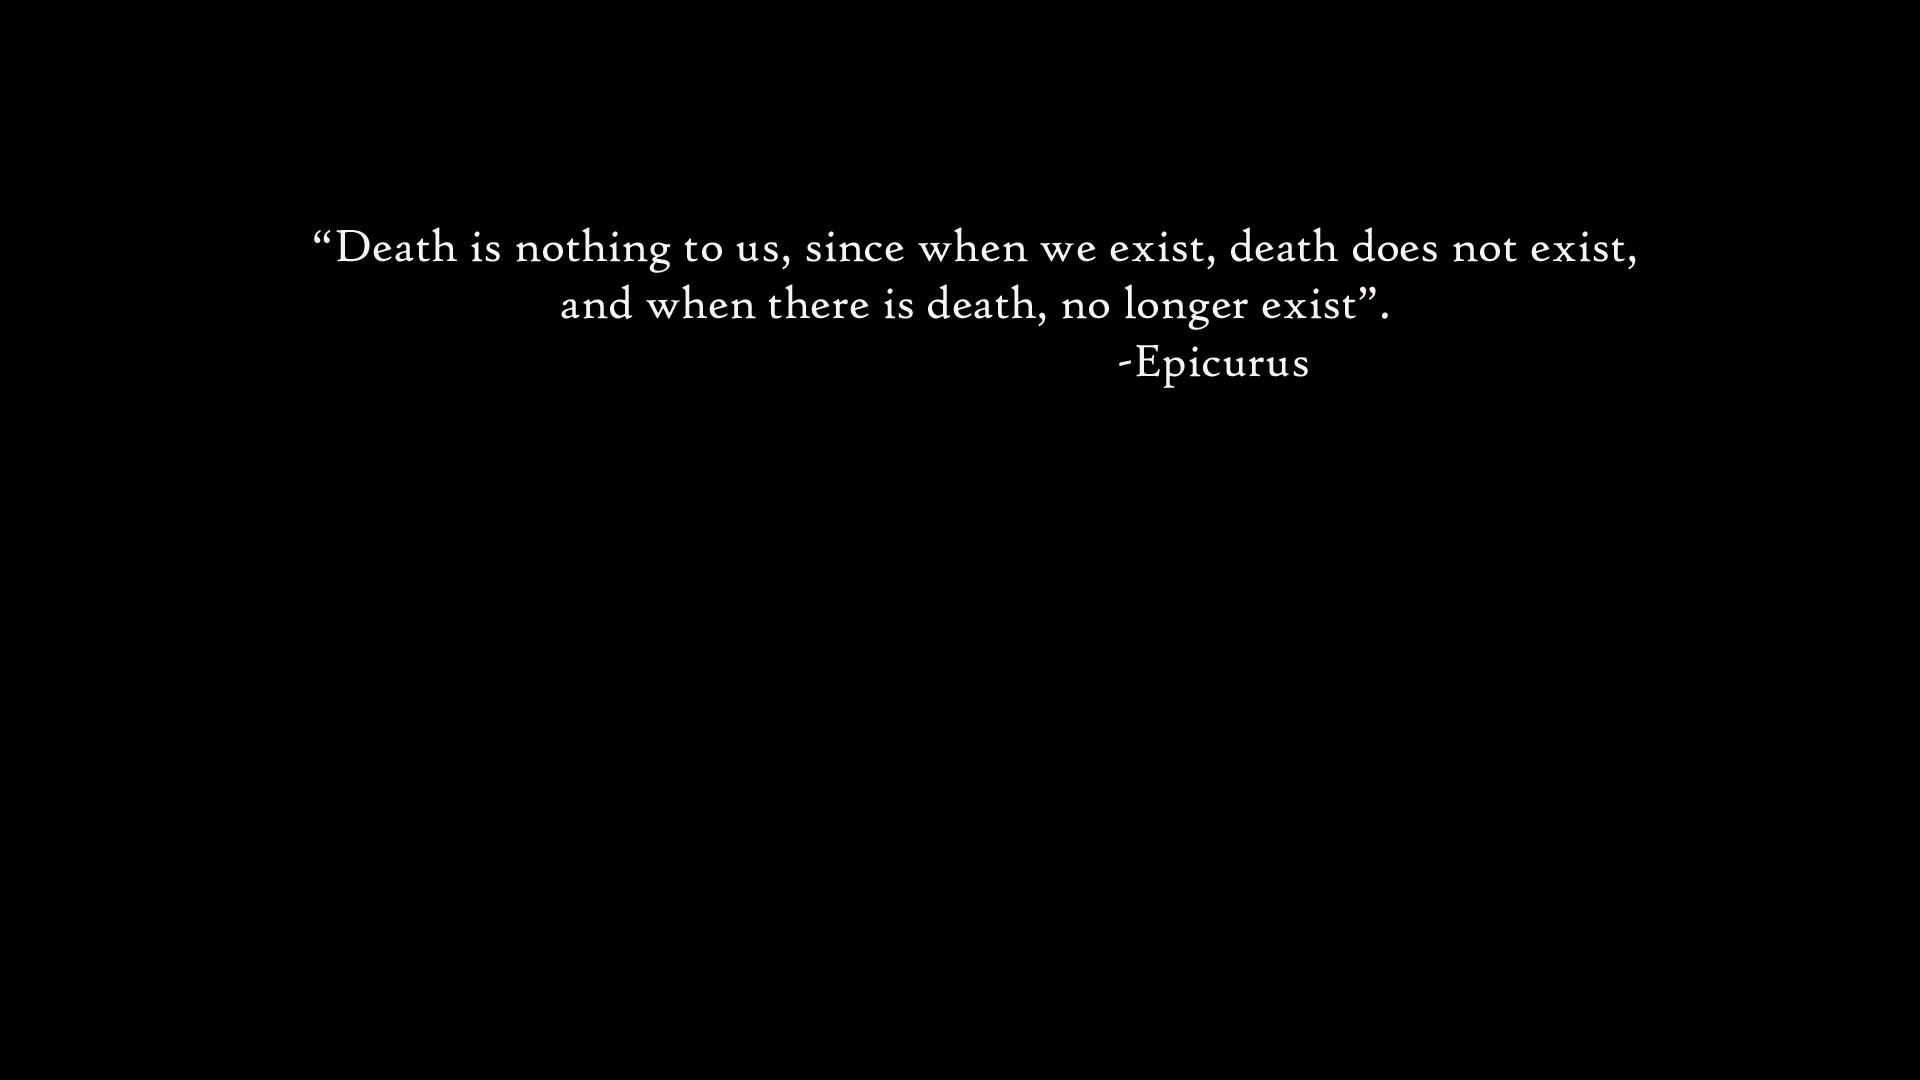 1920x1080 Quotes Epicurus Black Philosophy Text #wallpapers #widescreen